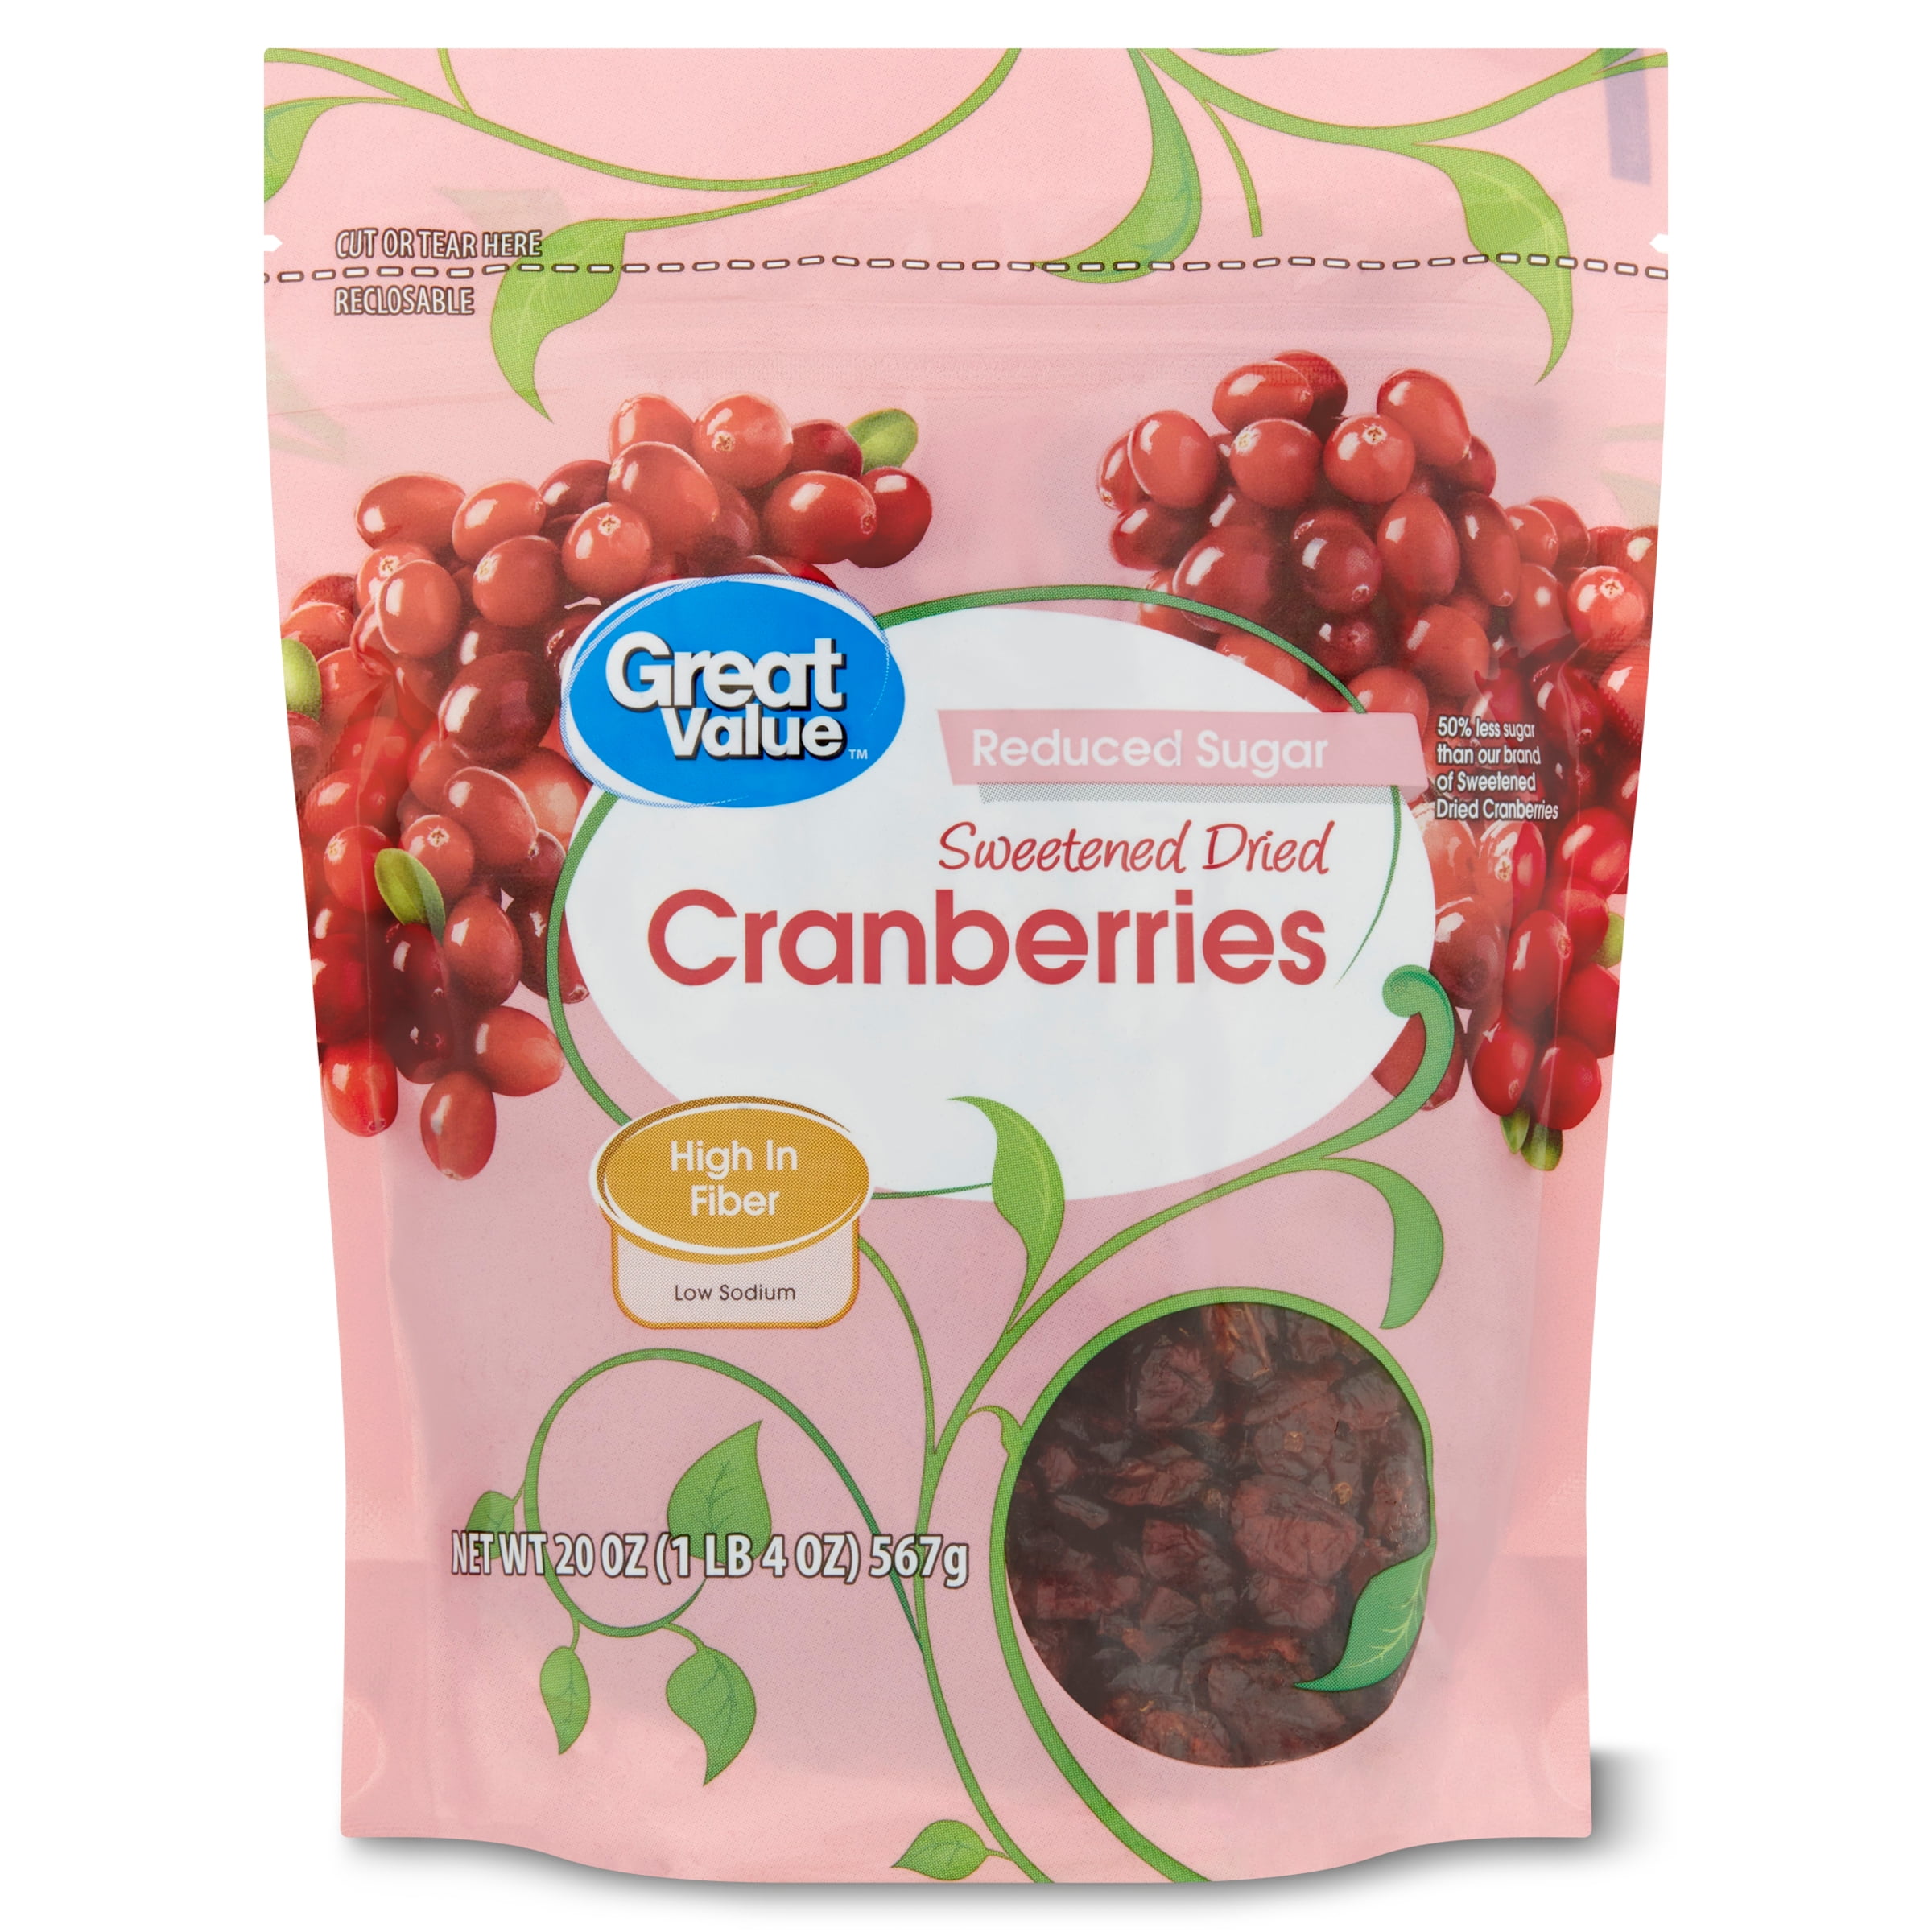 Great Value Reduced Sugar Sweetened Dried Cranberries, 20 oz